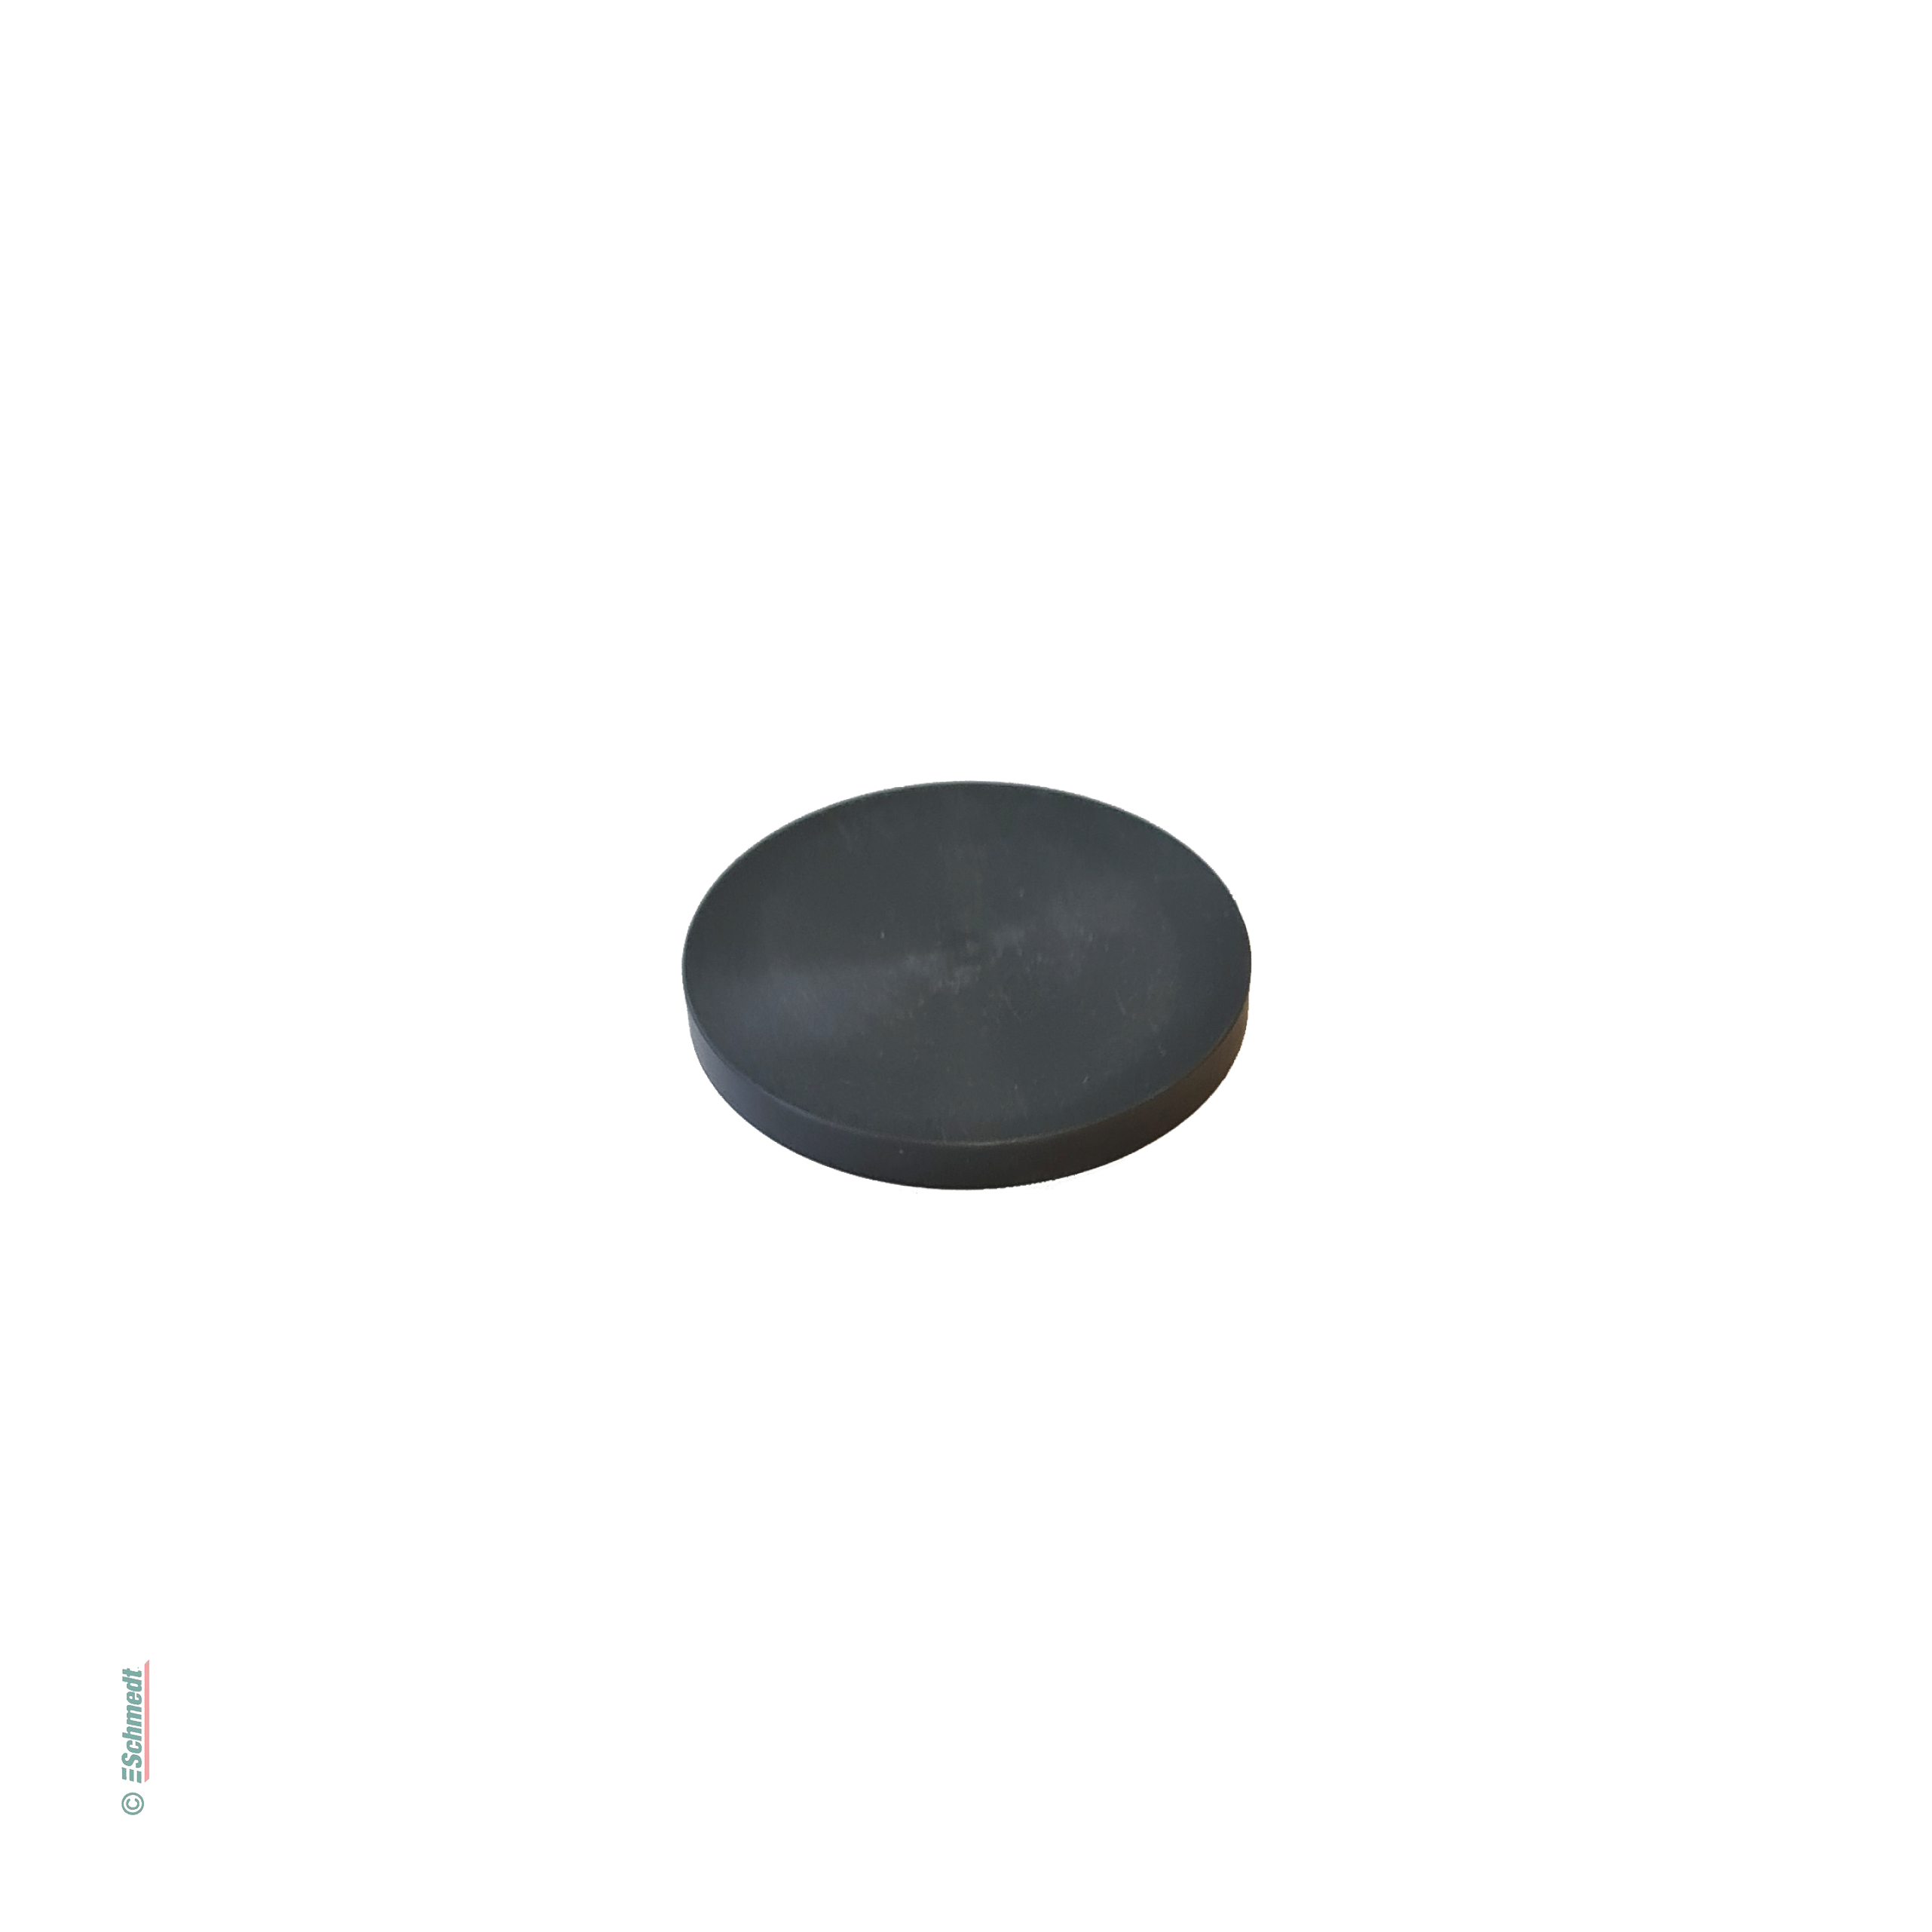 Drilling pad made of PVC, round - for paper-drilling machines - » Diameter: 50 mm
» Thickness: 5 mm...